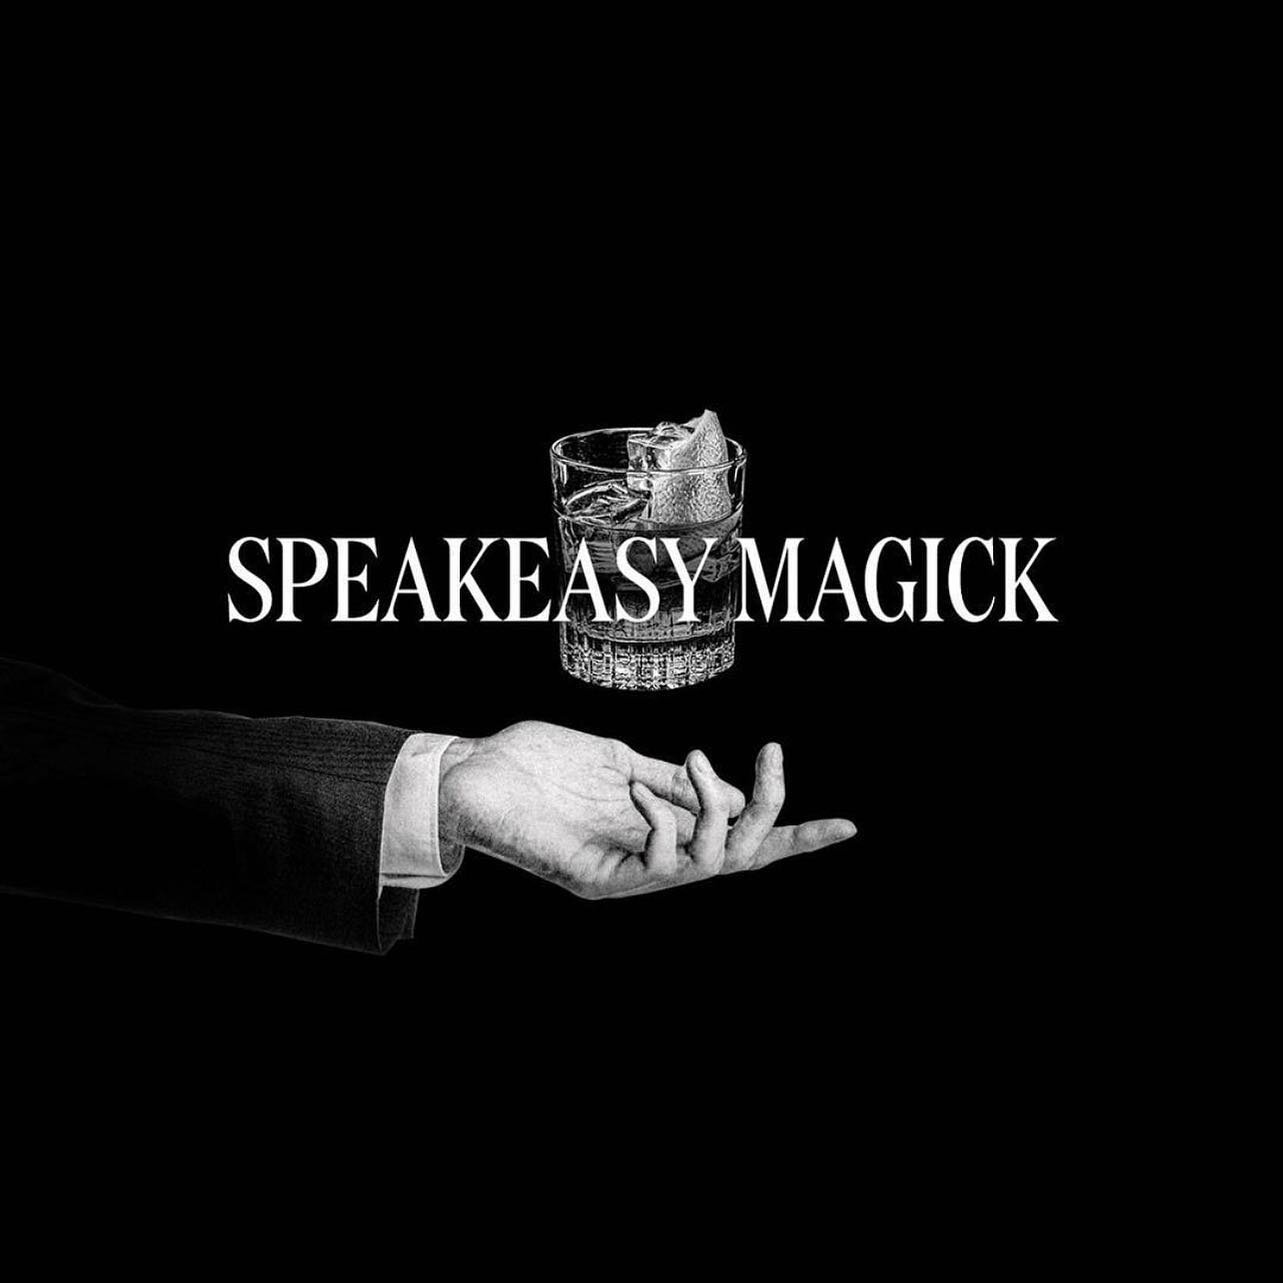 So excited to be back performing @speakeasymagick in #nyc this weekend!
#magic #magician